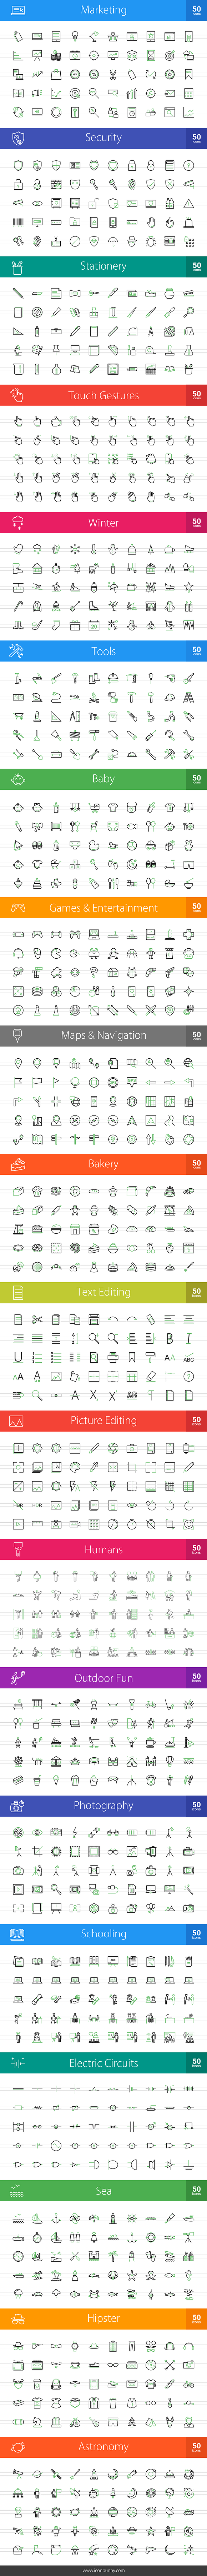 1000 Line Green & Black Icons (V4) in Icons - product preview 1